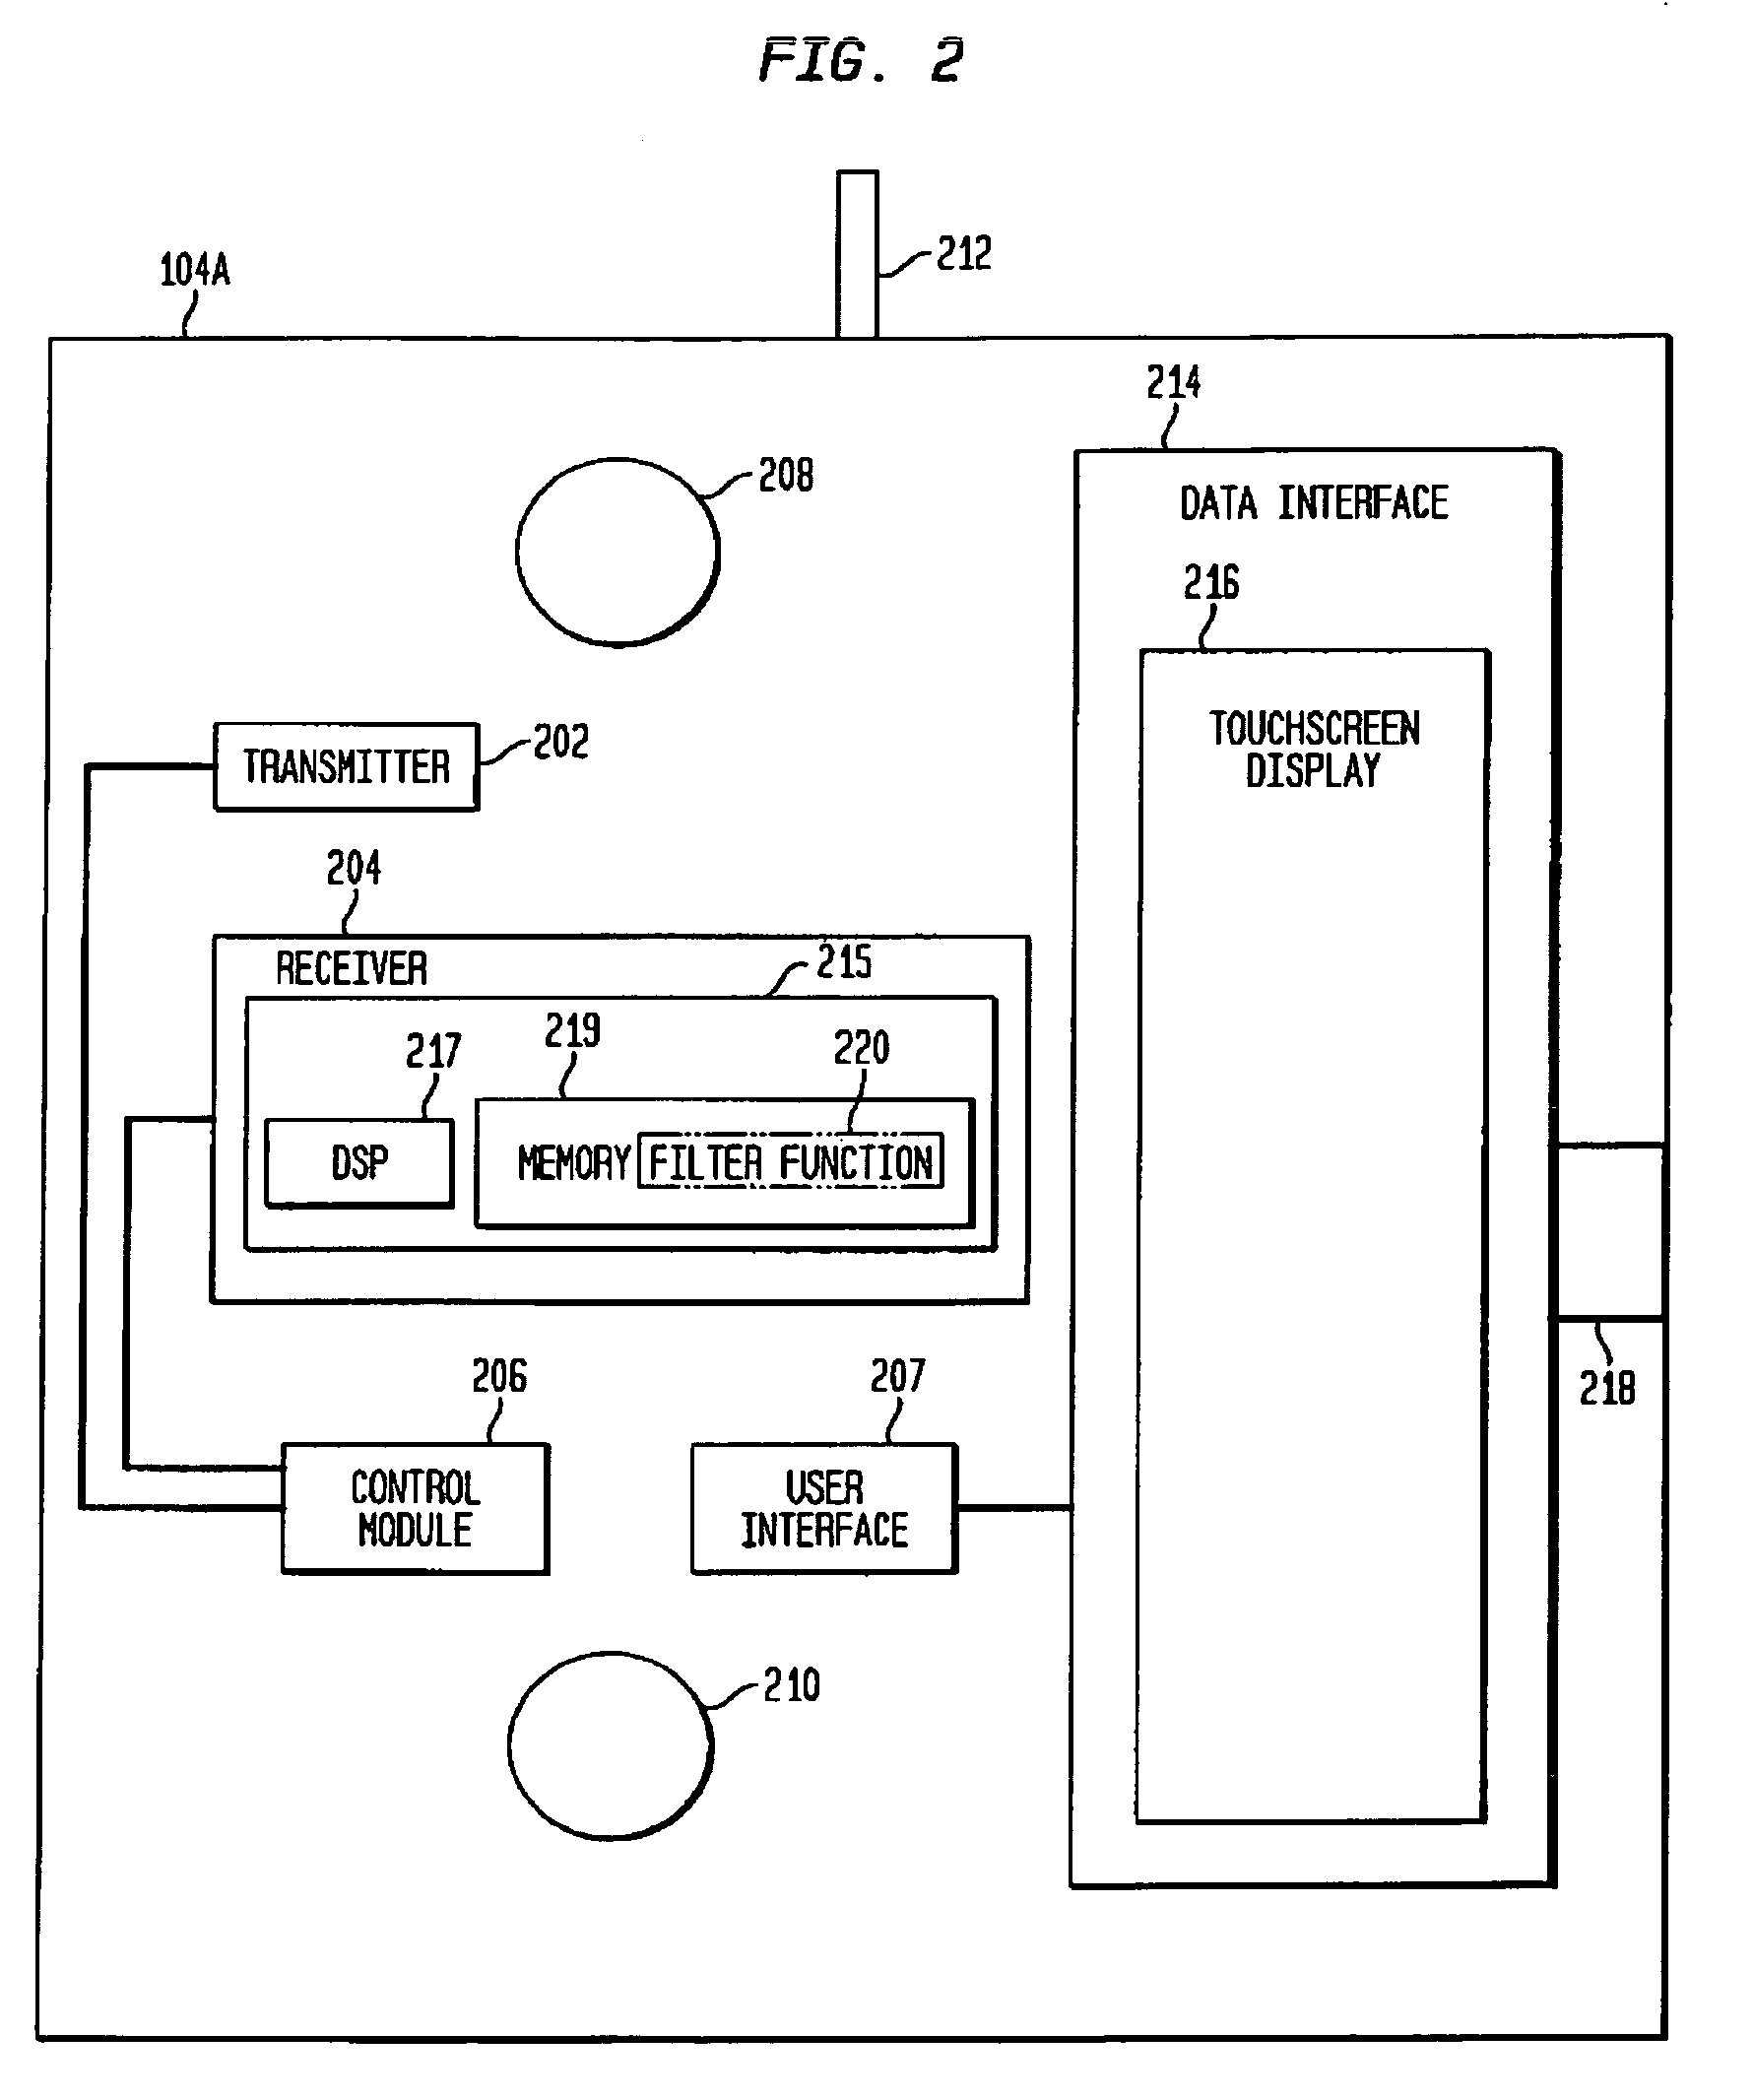 Methods and apparatus for allocating bandwidth to communication devices based on signal conditions experienced by the communication devices